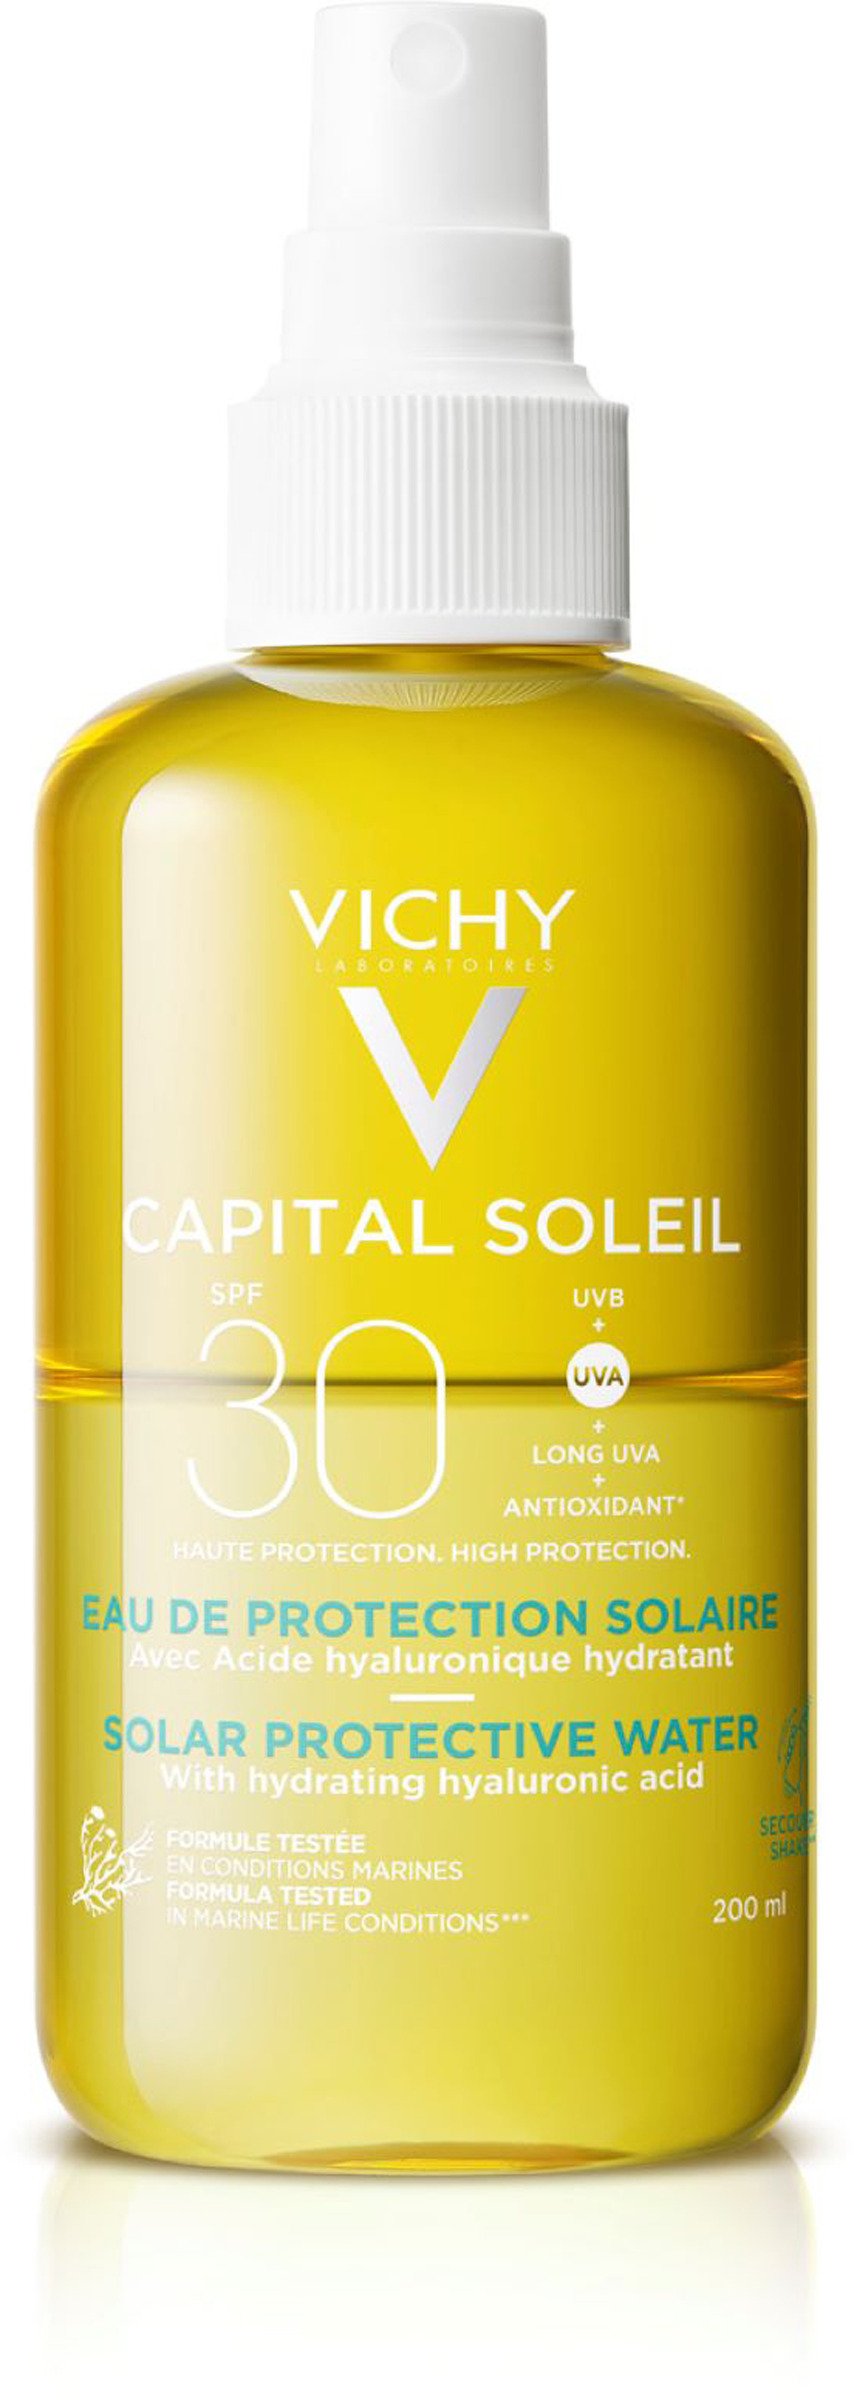 Vichy Capital Soleil Hydrating Solar Protective Water SPF30 200 ml